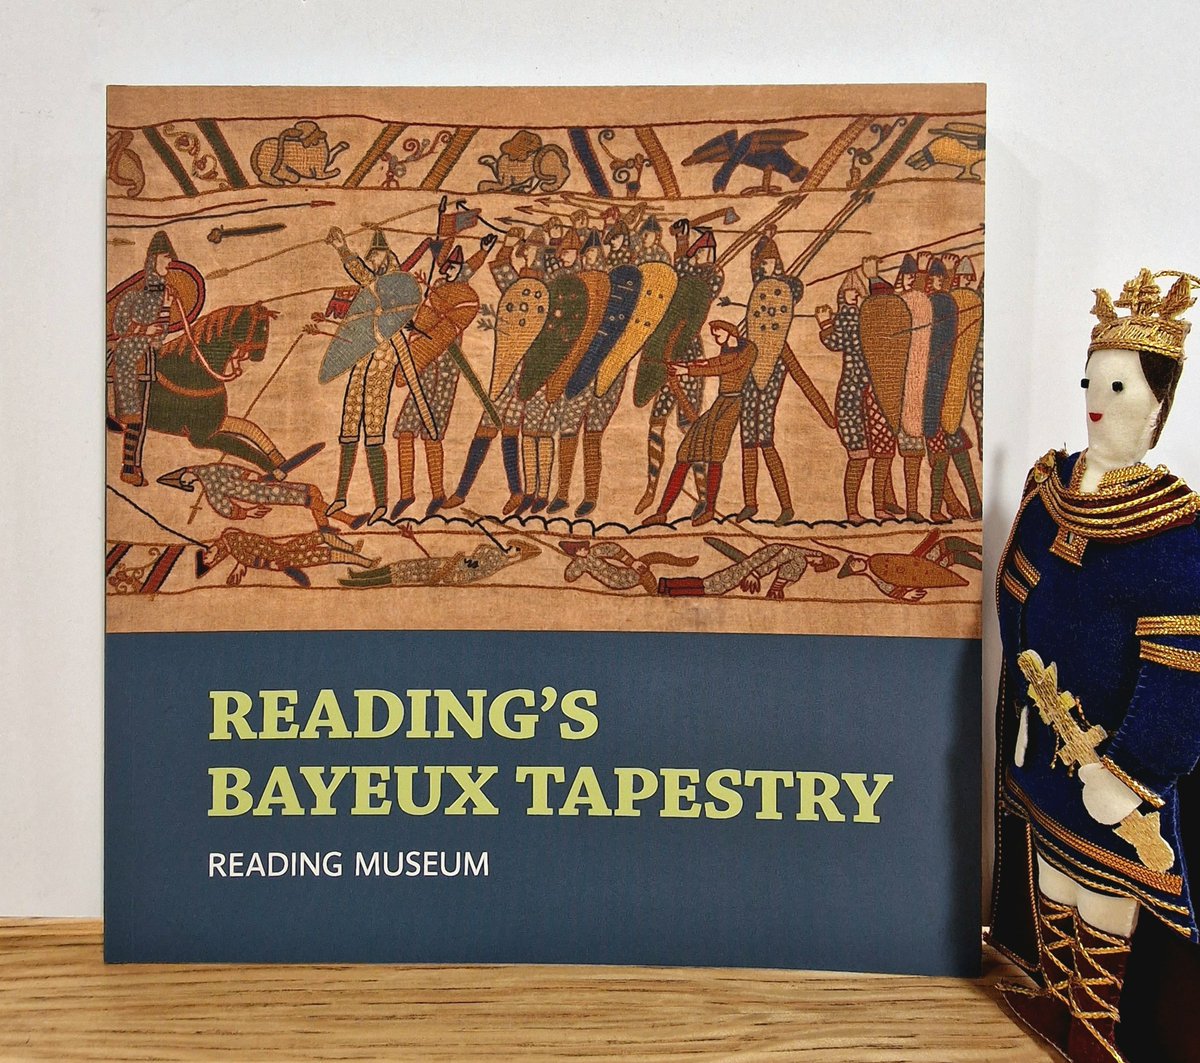 We are proud to support local publishers Two Rivers Press - take a look at our latest arrivals online and in the Museum shop. Including the very popular 'Reading's Bayeux Tapestry', NOW back in stock: rdguk.info/3Cbts #RDG #RDGUK #BritainsBayeuxTapestry #ShopLocal